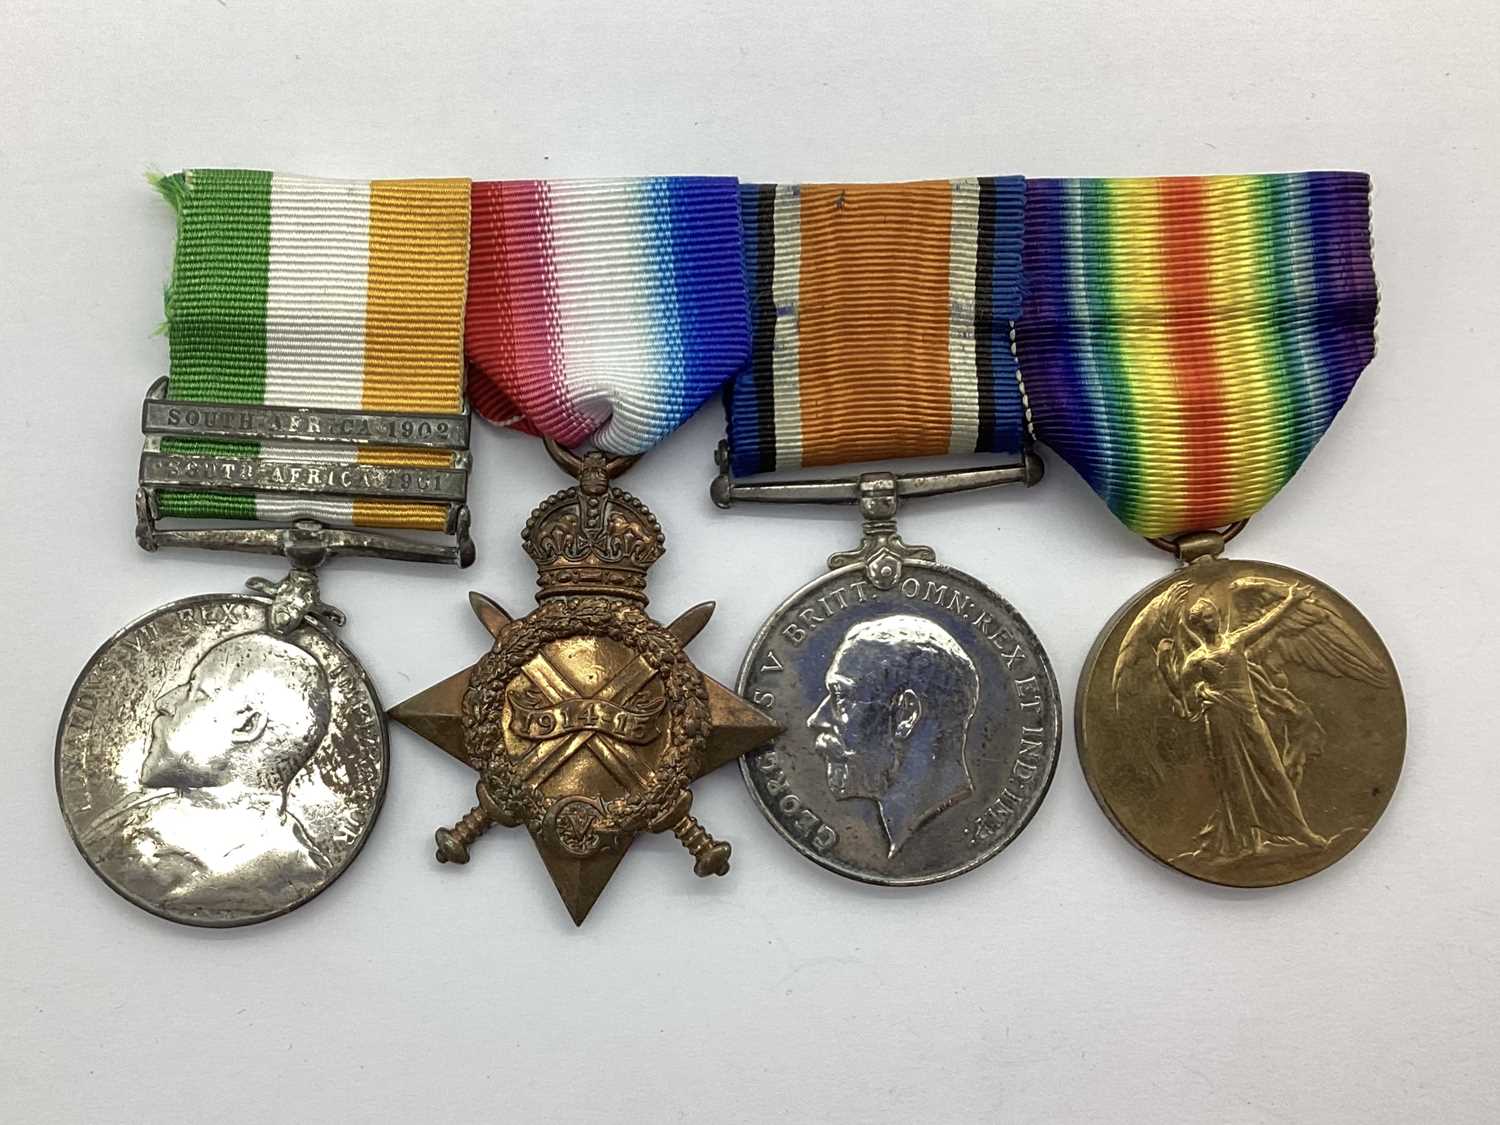 Edward VII Kings South Africa Medal, with two clasps South Africa 1901 and 1902, awarded to 6375 PTE - Image 2 of 4